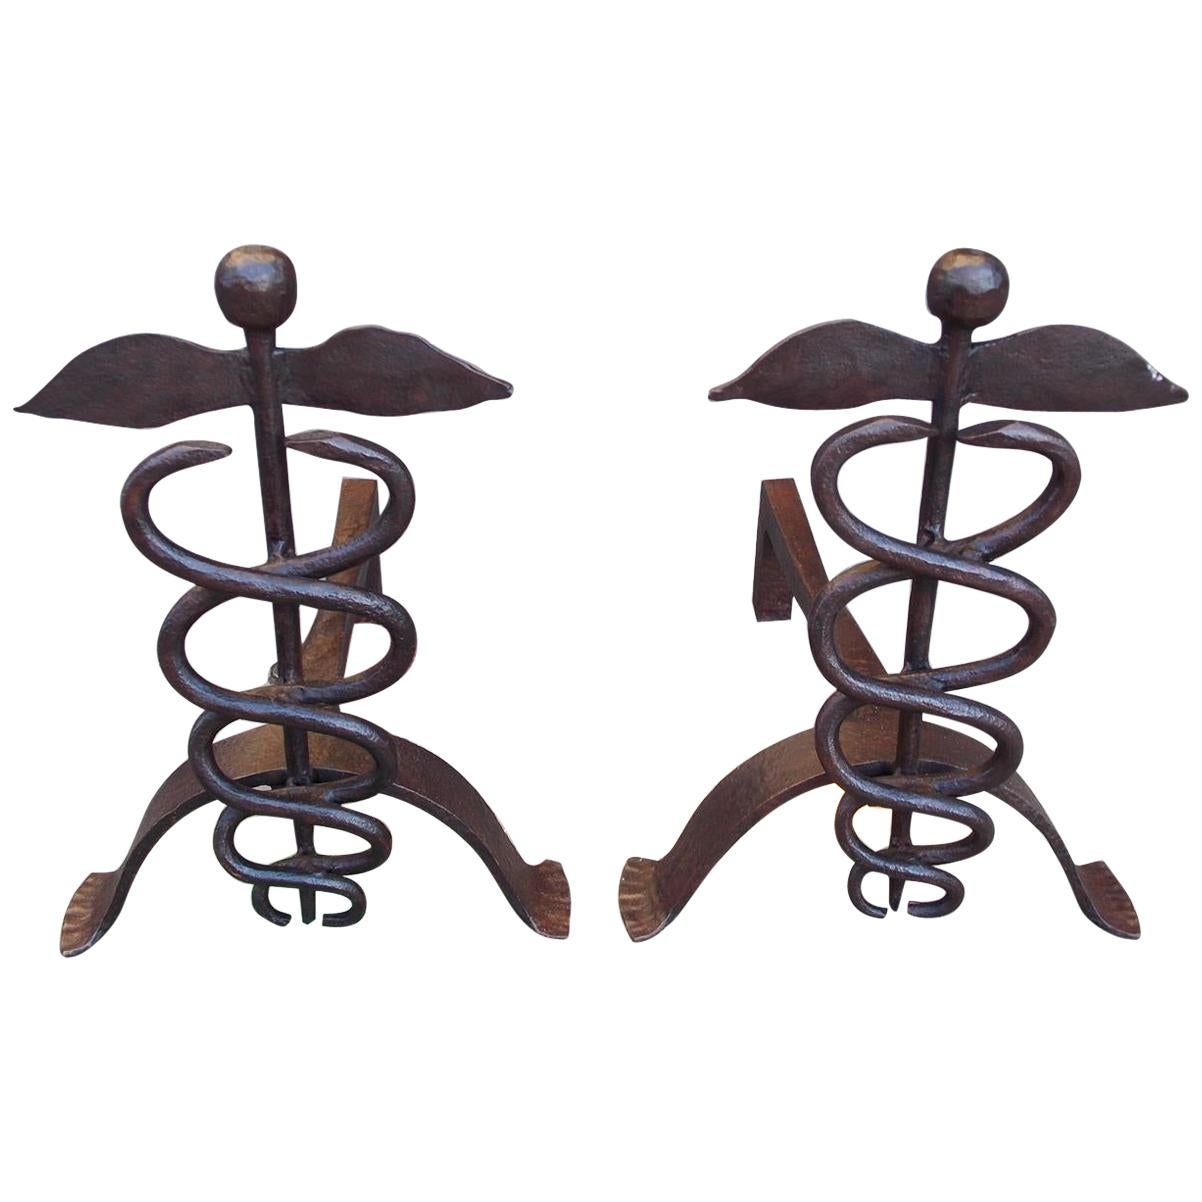 Pair of American Wrought Iron Finial Caduceus Andirons with Splayed Feet, C 1850